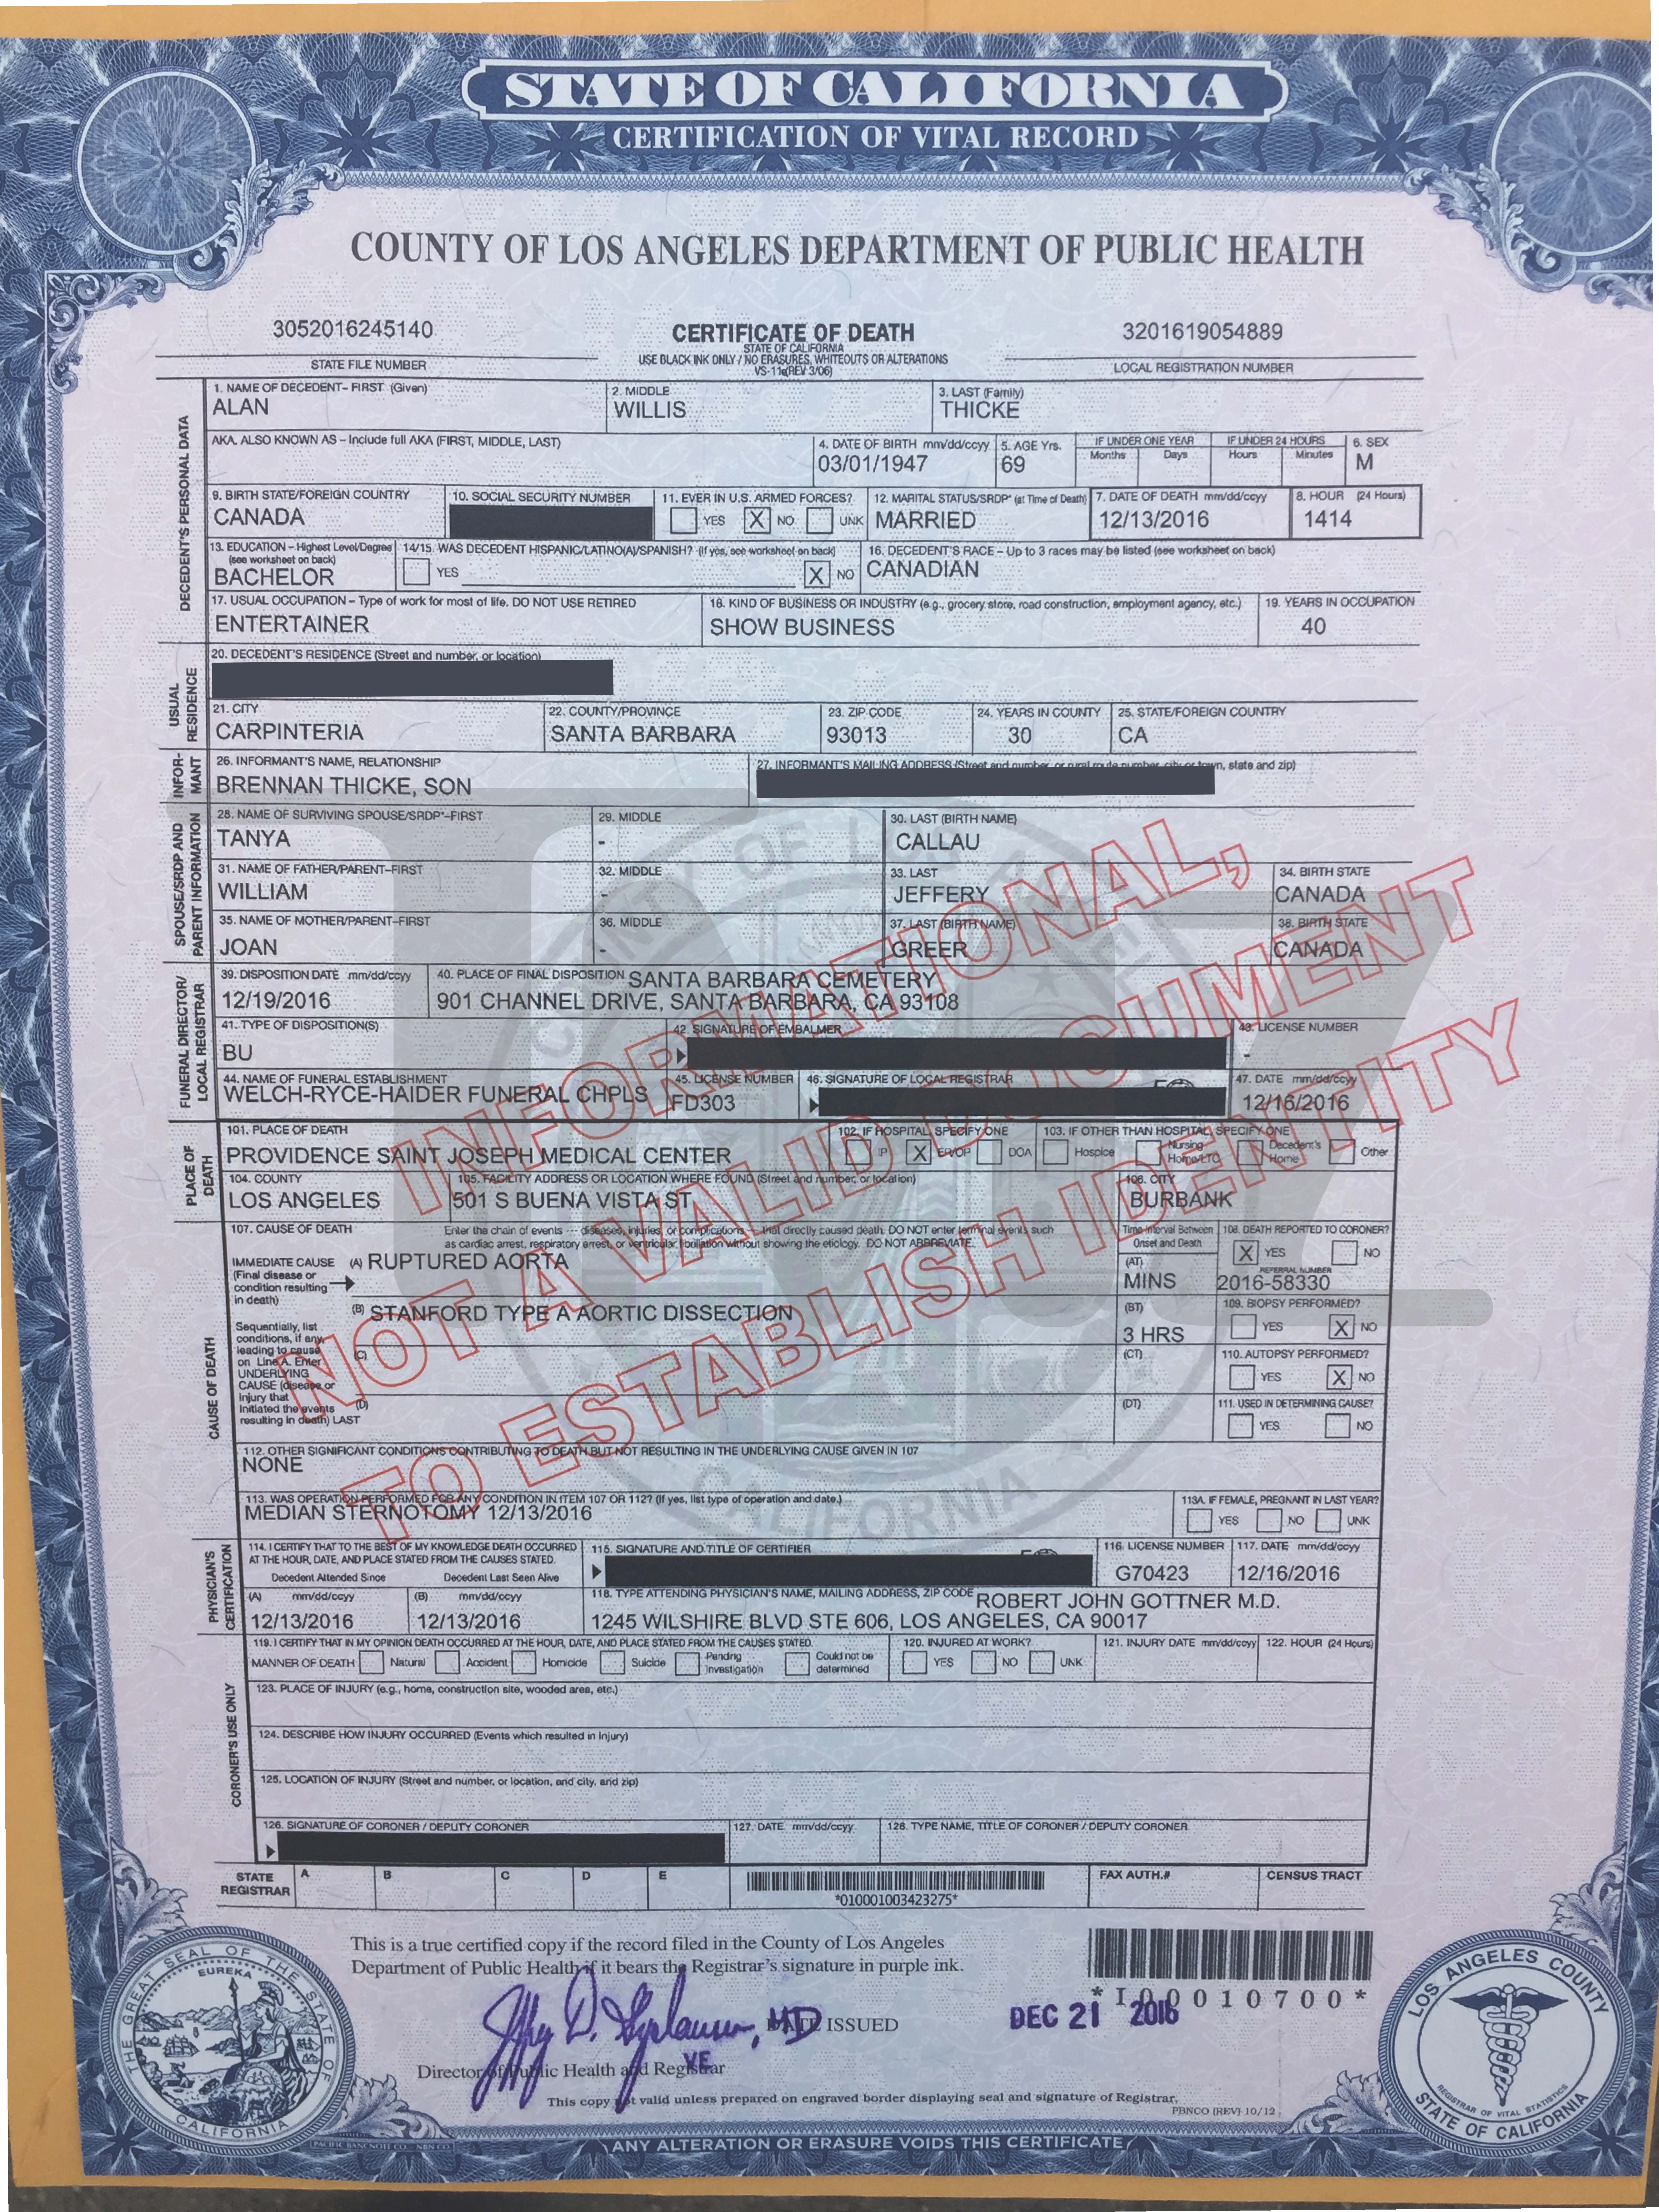 Death Certificate for Mr. Alan Thicke who died from an aortic dissection with rupture